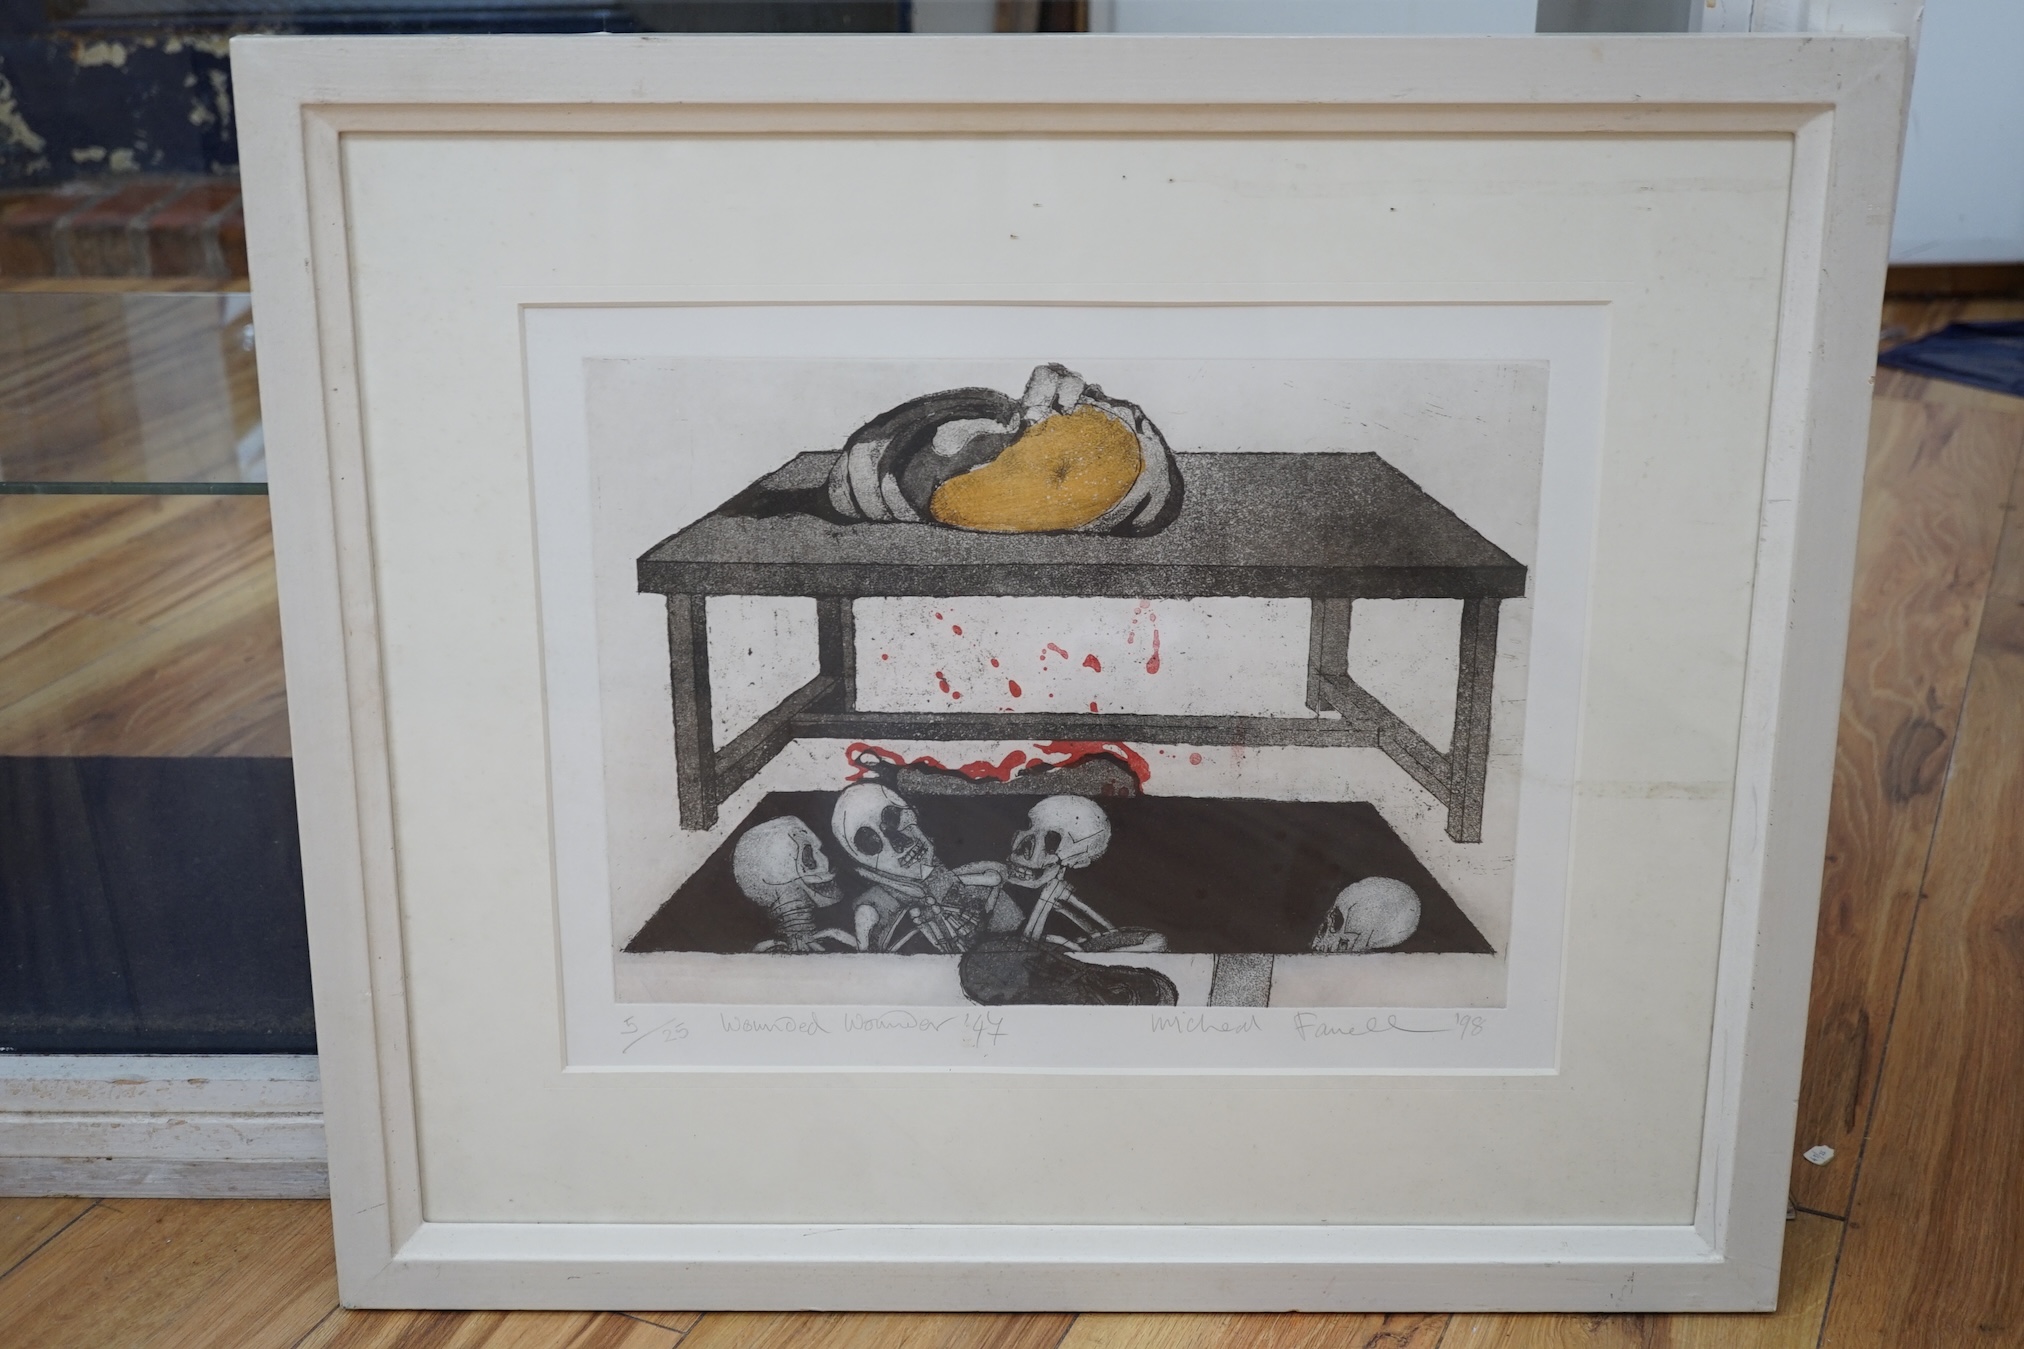 From the Studio of Fred Cuming. Michael Farrell (1940-2000), limited colour etching 5/25, ‘Wounded Wonder’, signed in pencil, 34 x 44cm. Condition - fair